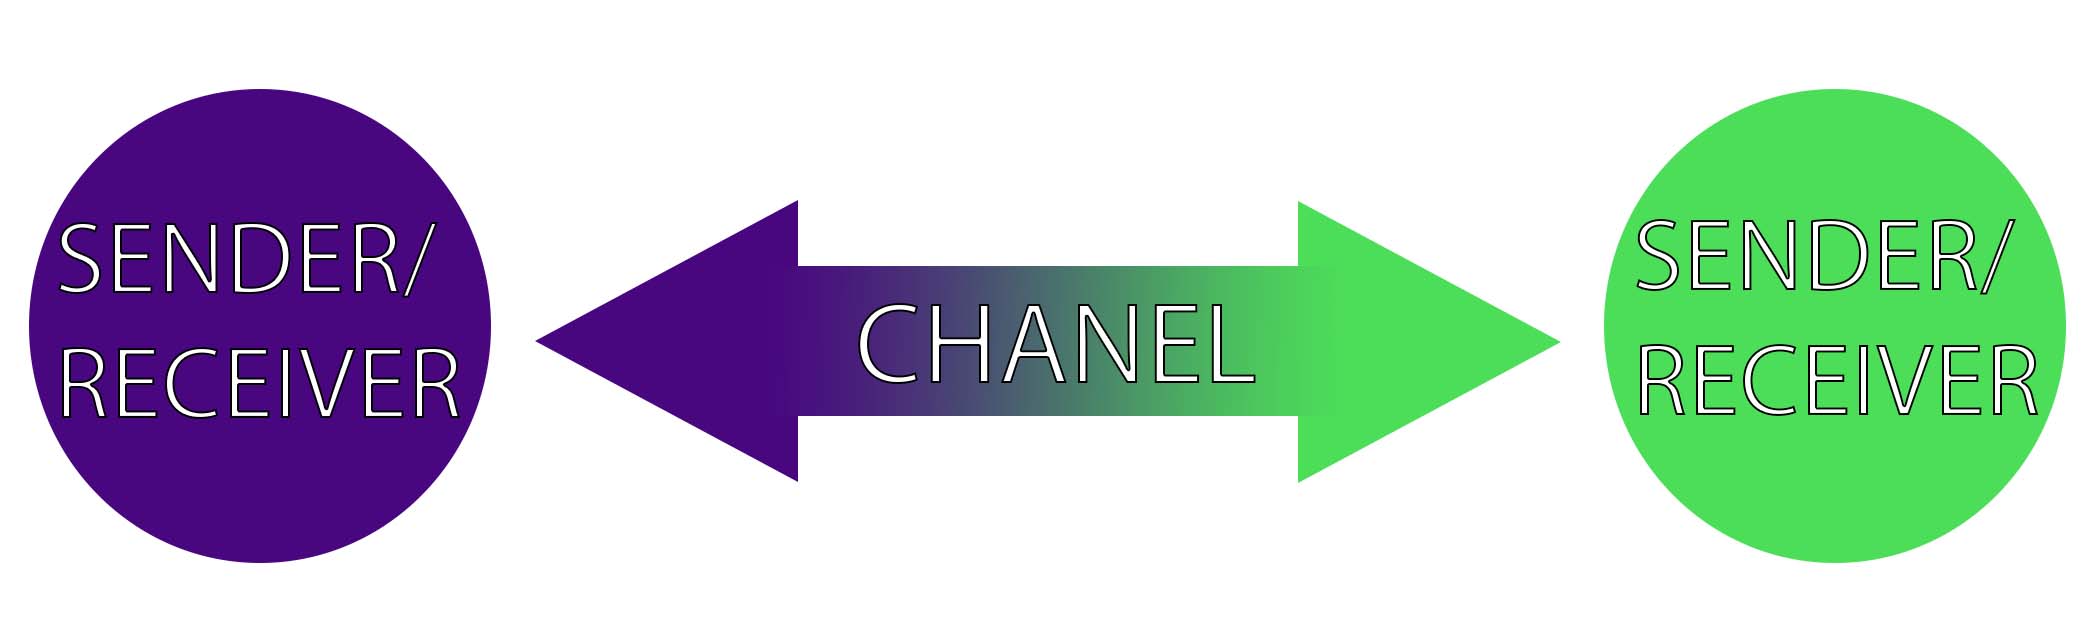 This Graph illustrates the transaction model of communication. On either side we have a circle labeled "sender/receiver" and in the center we have a double sided arrow labeled "chanel" to show that information moves equally in both directions.